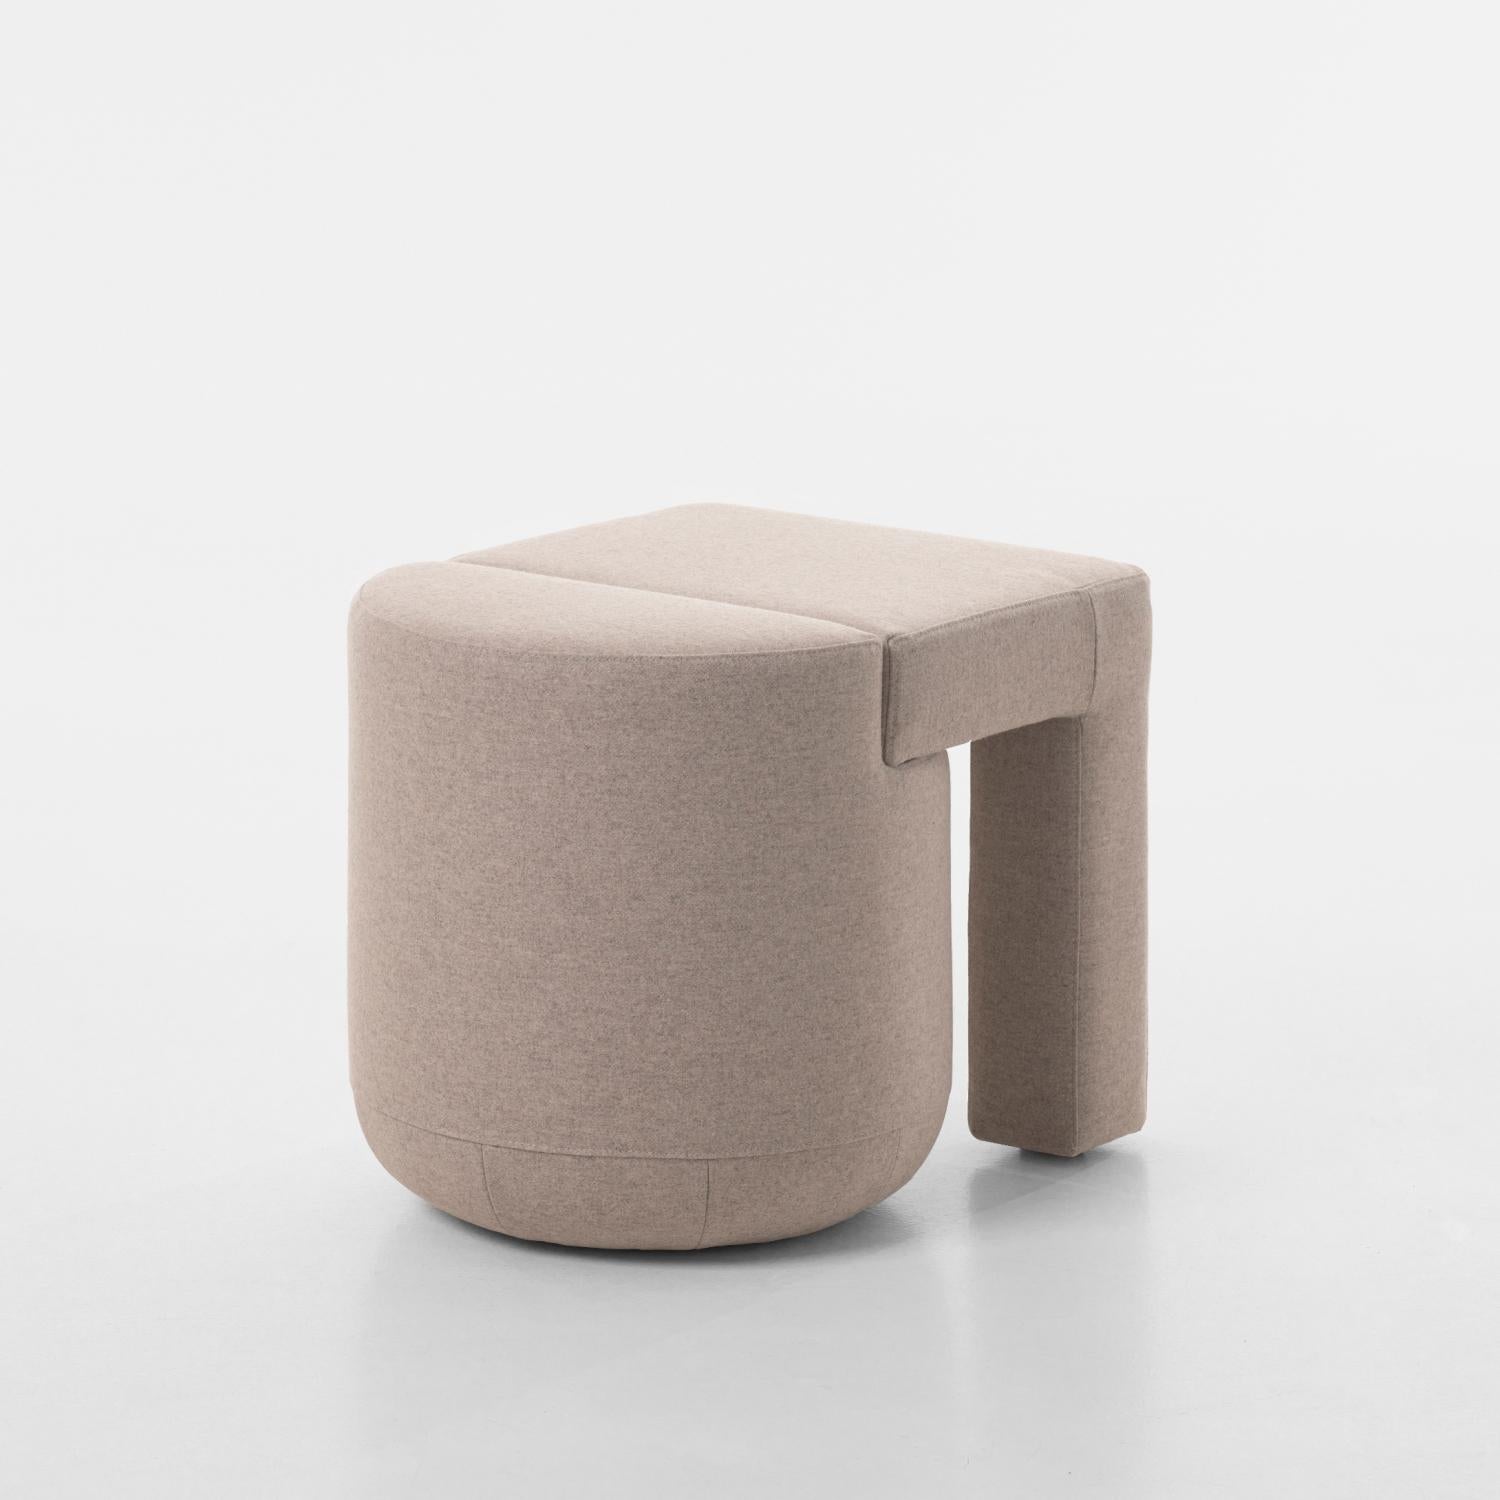 Pouf FOSSIL
Designer: Dmitriy Kozinenko for Oitoproducts

FOSSIL upholstered furniture collection is a first collaboration with the talented Ukrainian product designer Dmitriy Kozinenko !
This is a story about monolithic forms and vivid visual